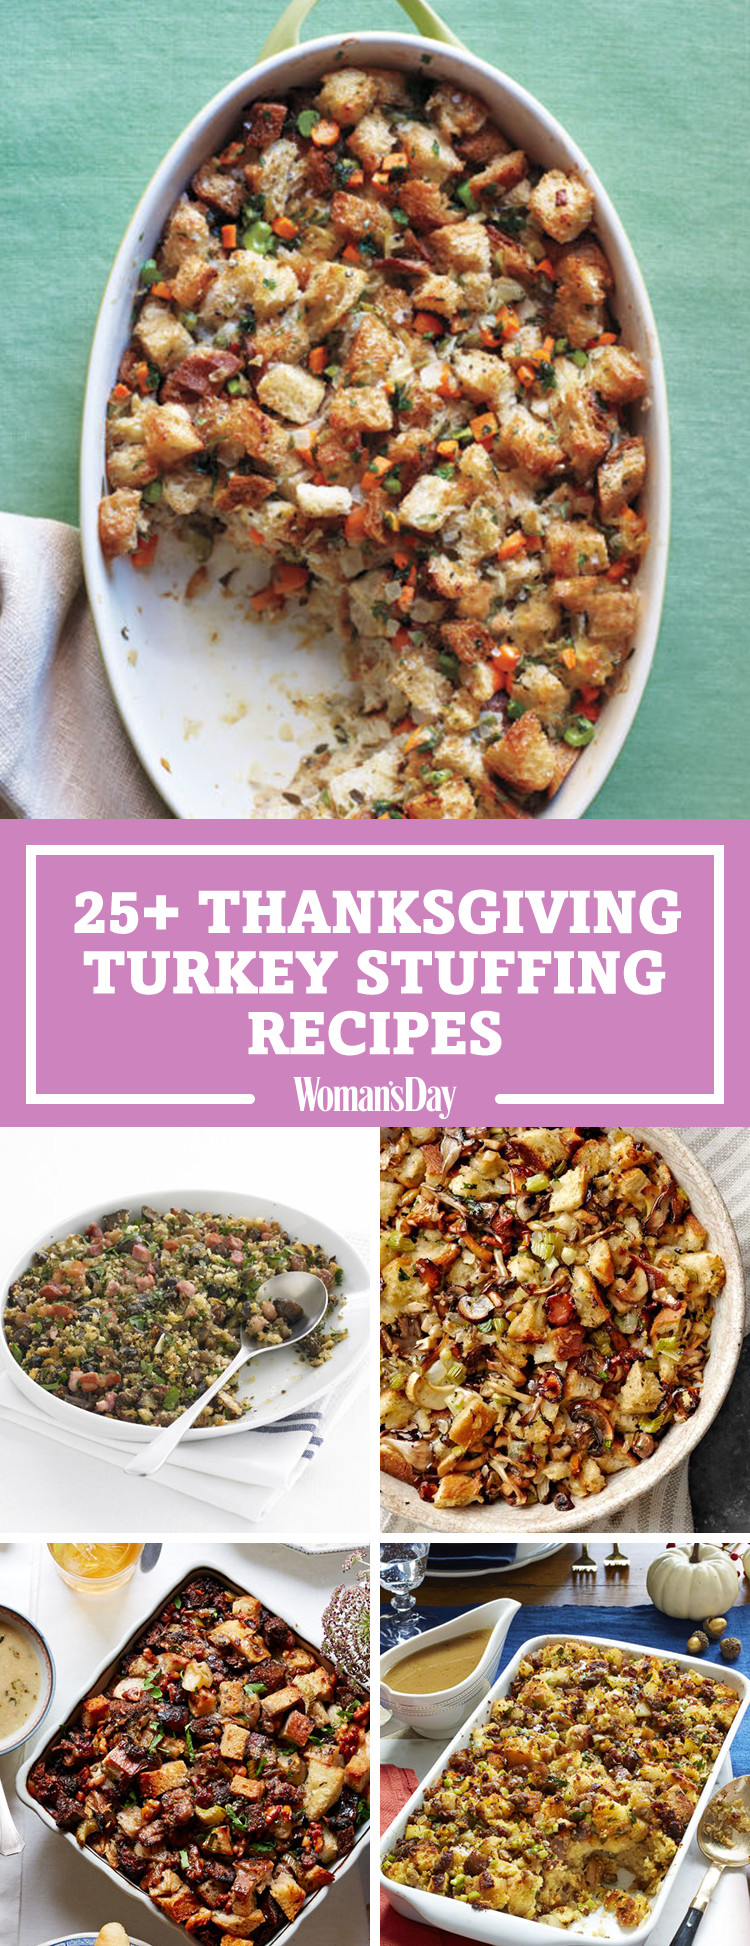 Turkey Stuffing Recipes For Thanksgiving
 28 Best Turkey Stuffing Recipes Easy Thanksgiving